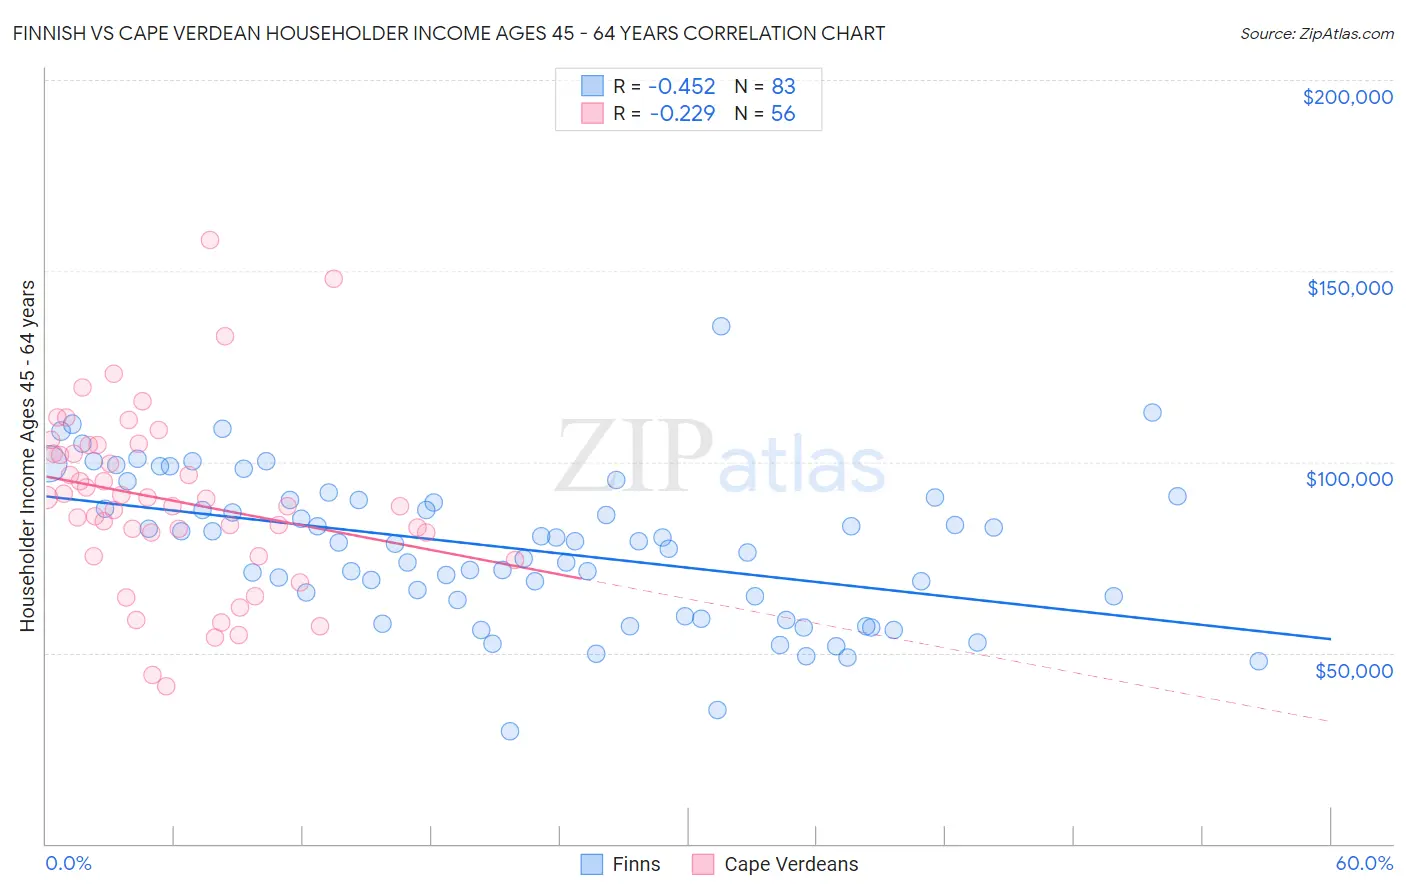 Finnish vs Cape Verdean Householder Income Ages 45 - 64 years